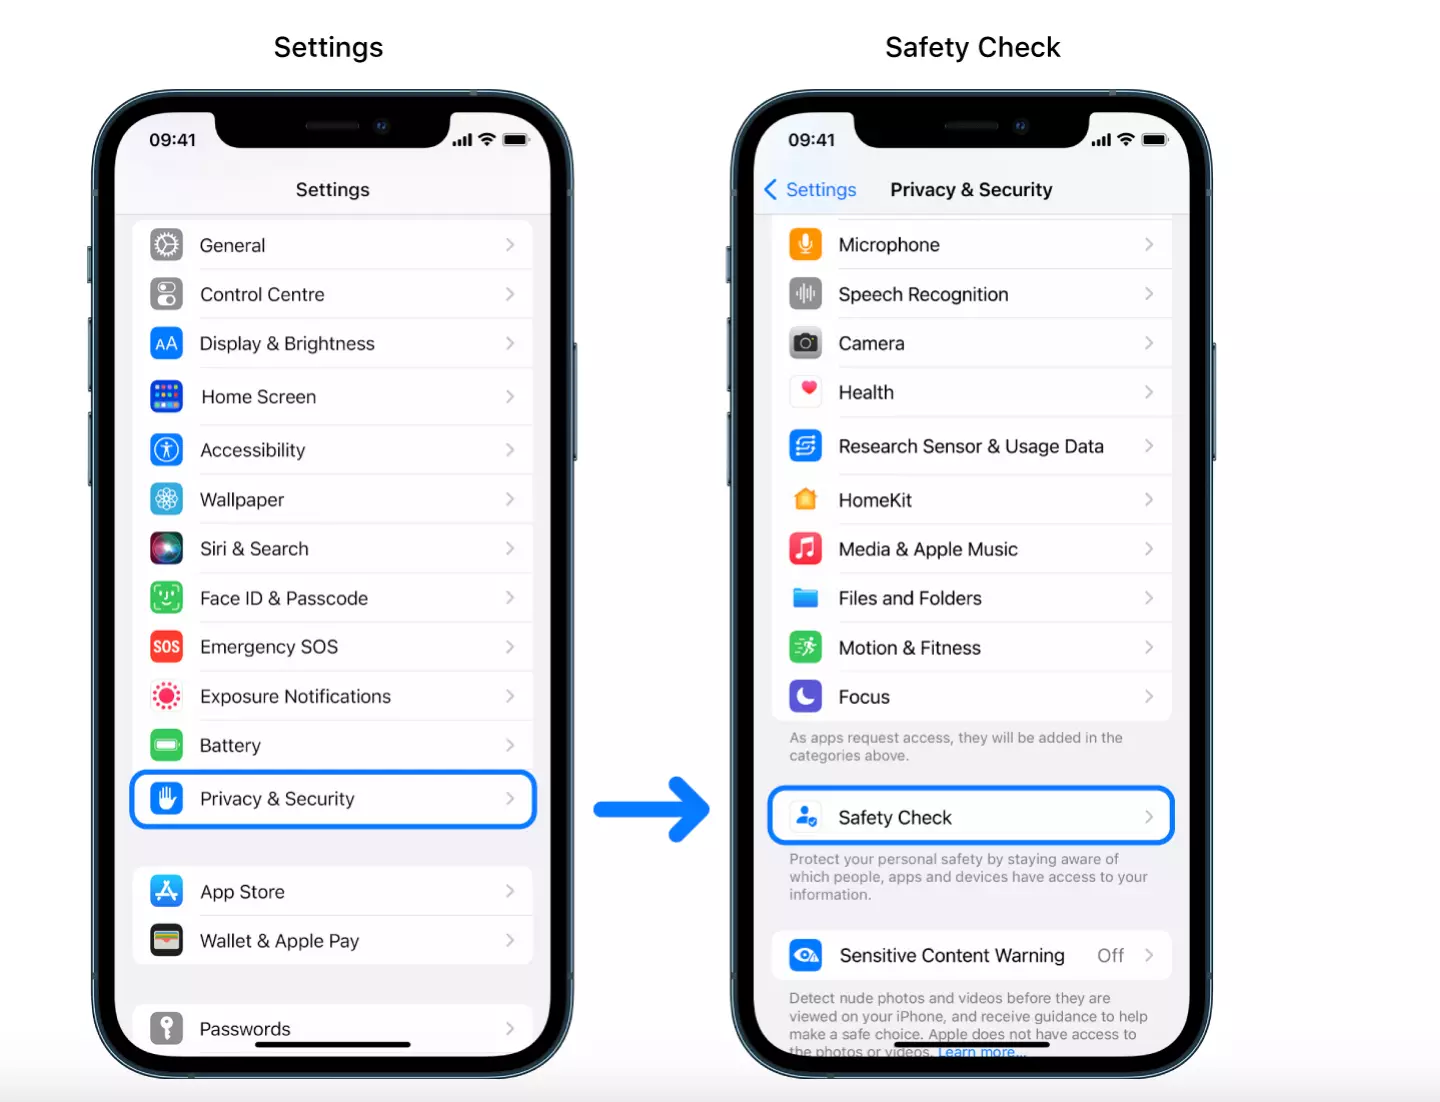 The Safety Check is a quick way to prevent sharing. (Apple)